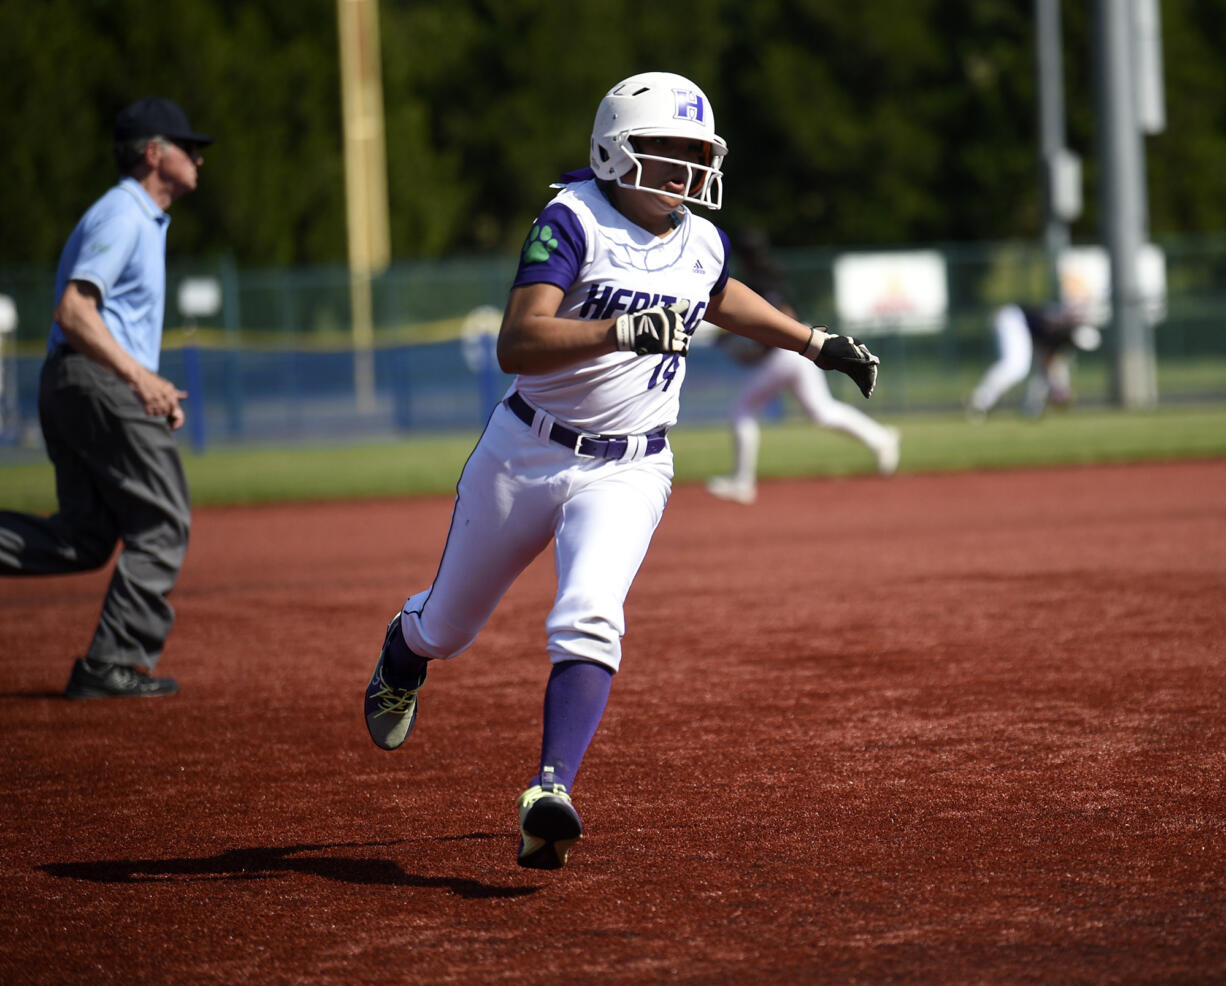 Charliana Lizama rounds third on her way to scoring a run during Heritage's 11-6 win over Garfield at the 3A state softball tournament at Regional Athletic Complex in Lacey on Thursday, May 25, 2023.